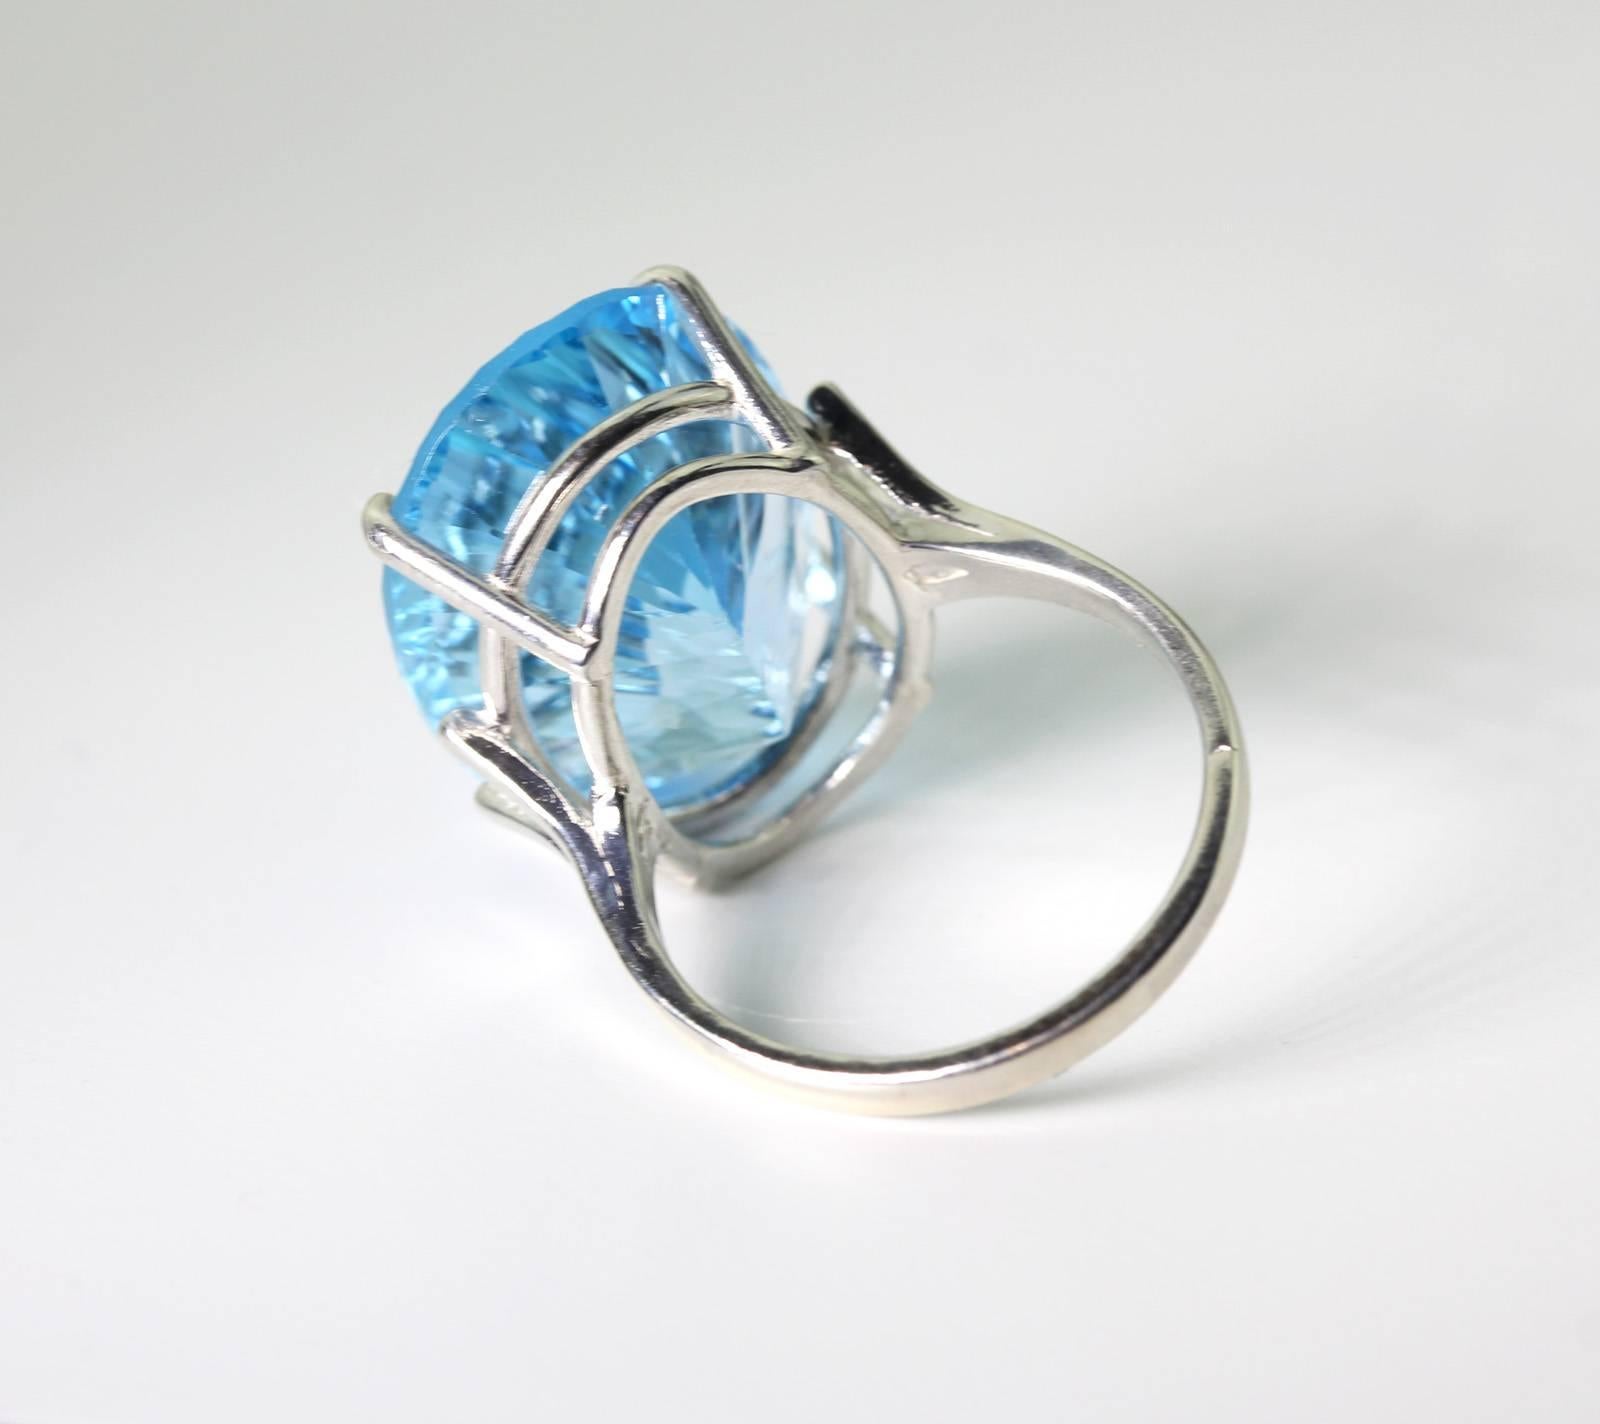 22.30 Carat Brillian Blue Topaz Cocktail or Party Sterling Silver Ring 1